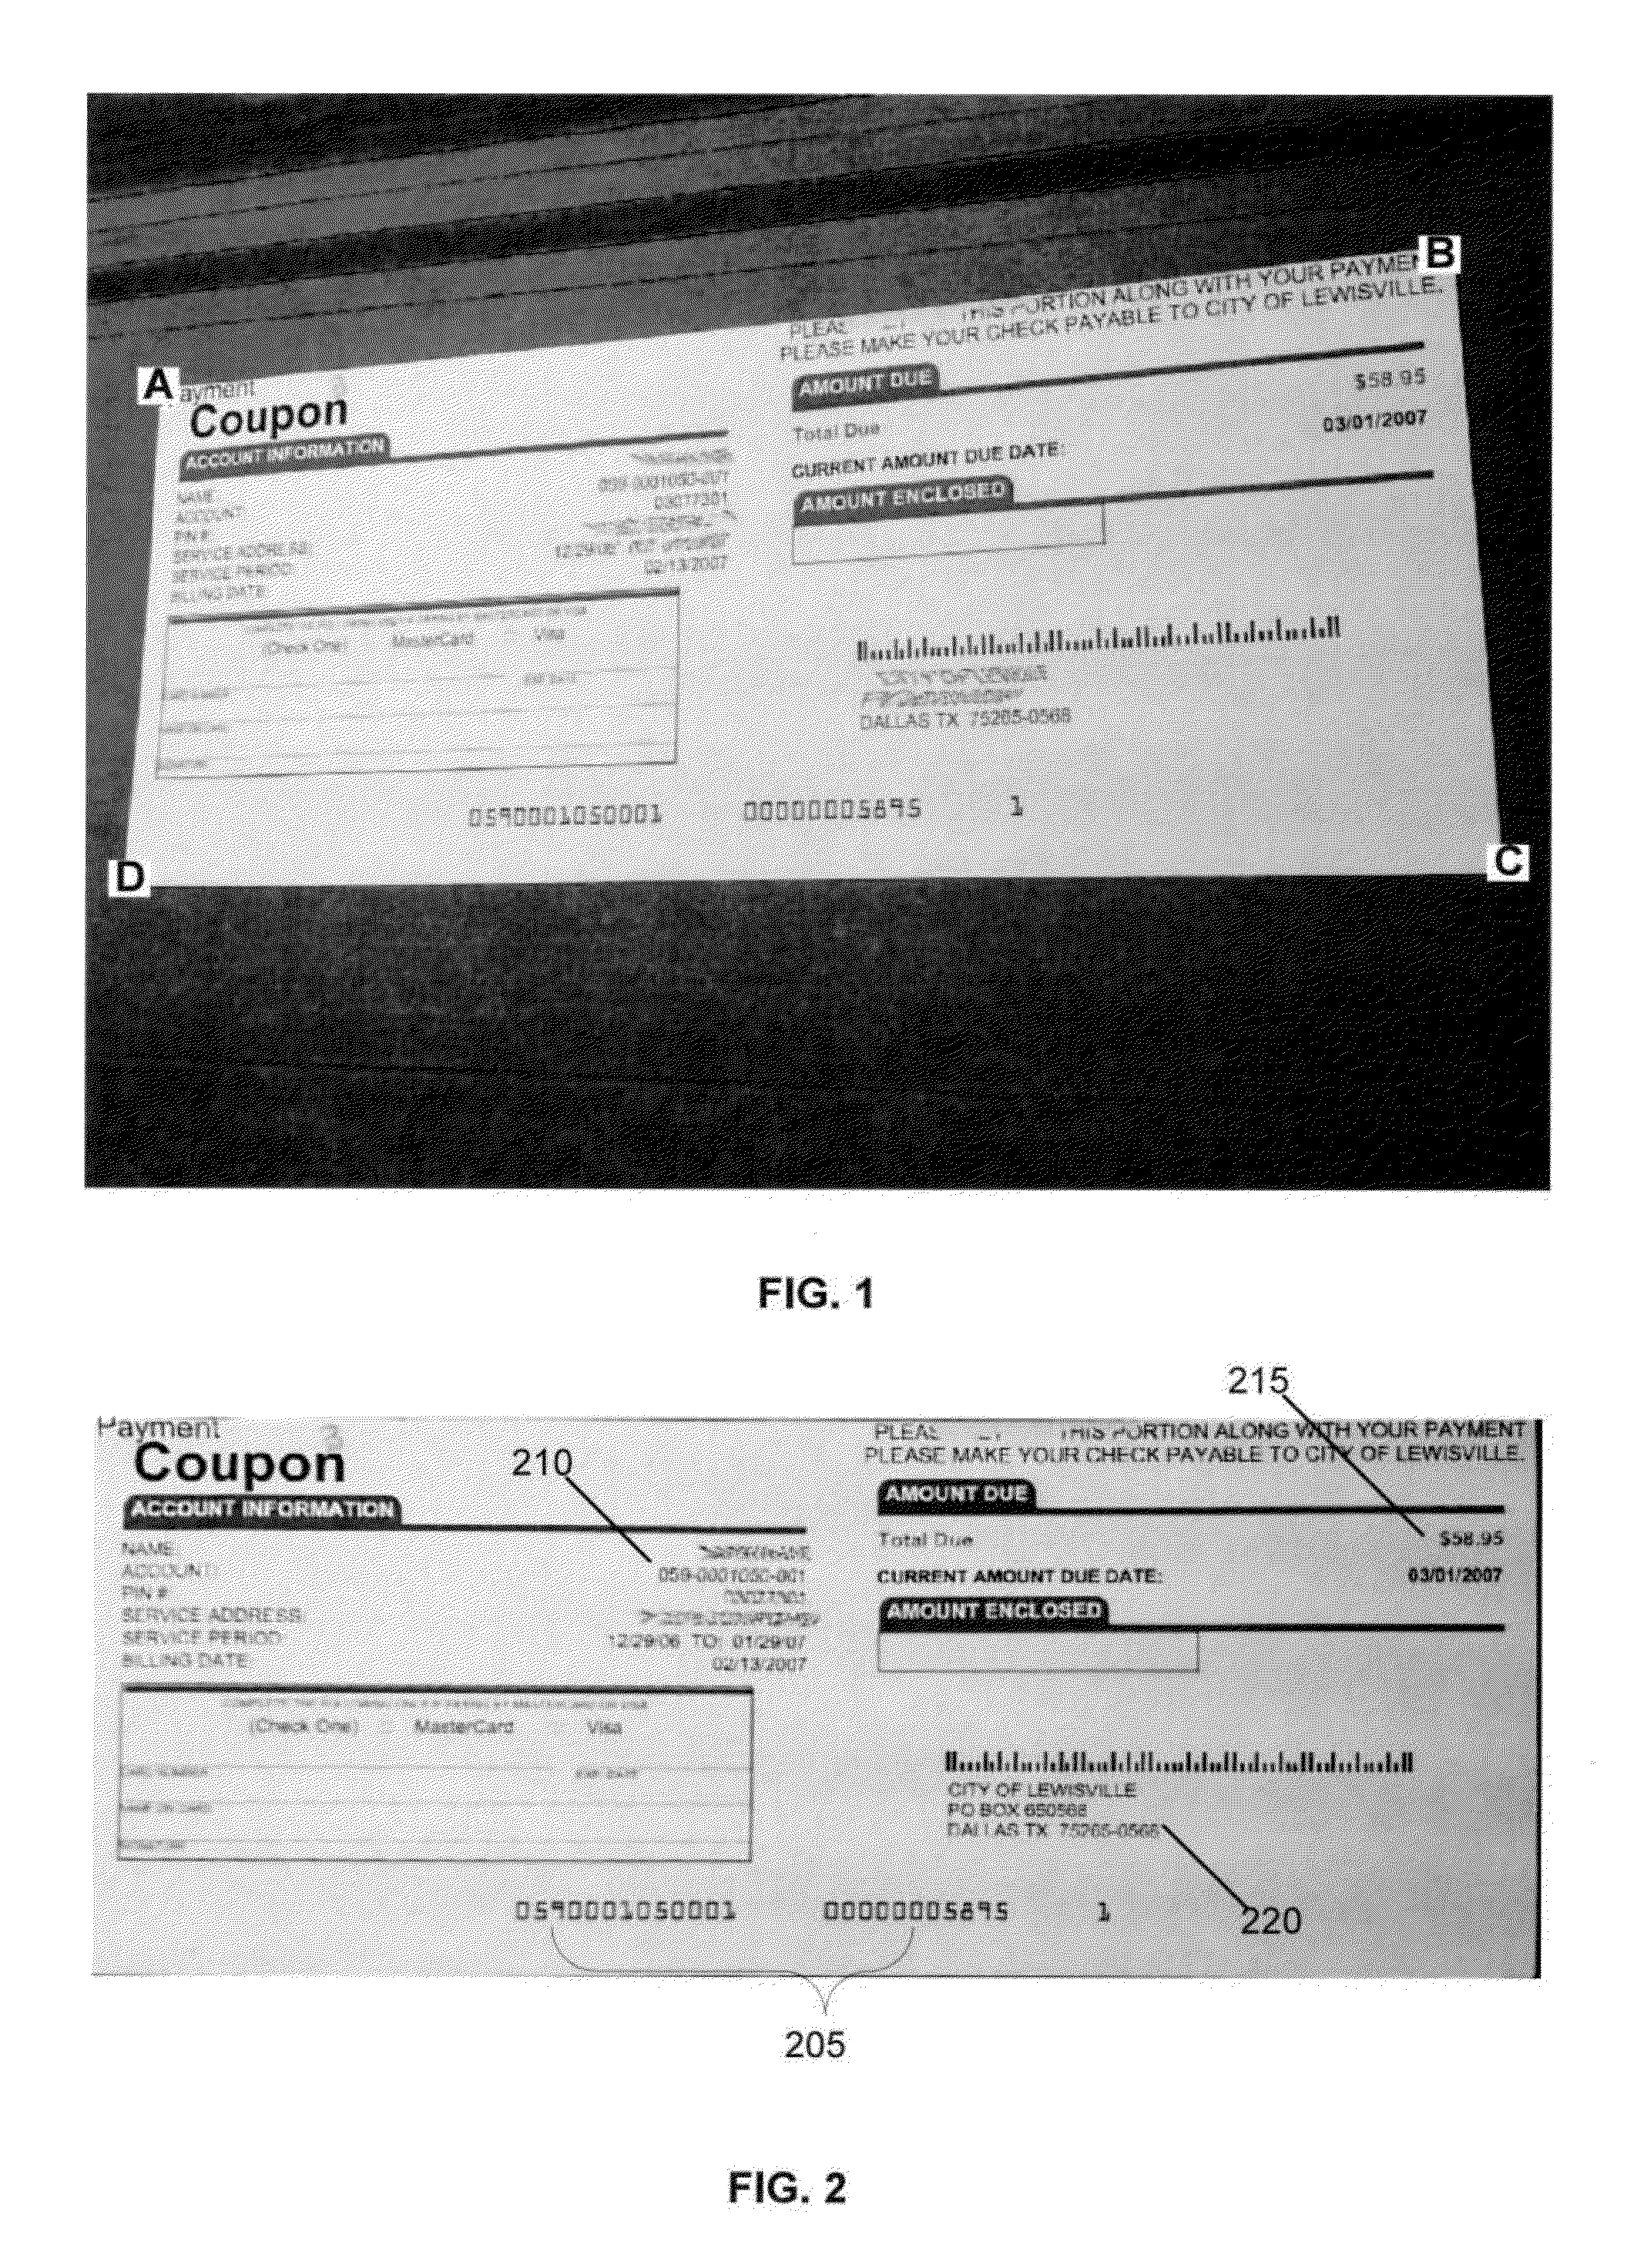 Systems and methods for obtaining financial offers using mobile image capture